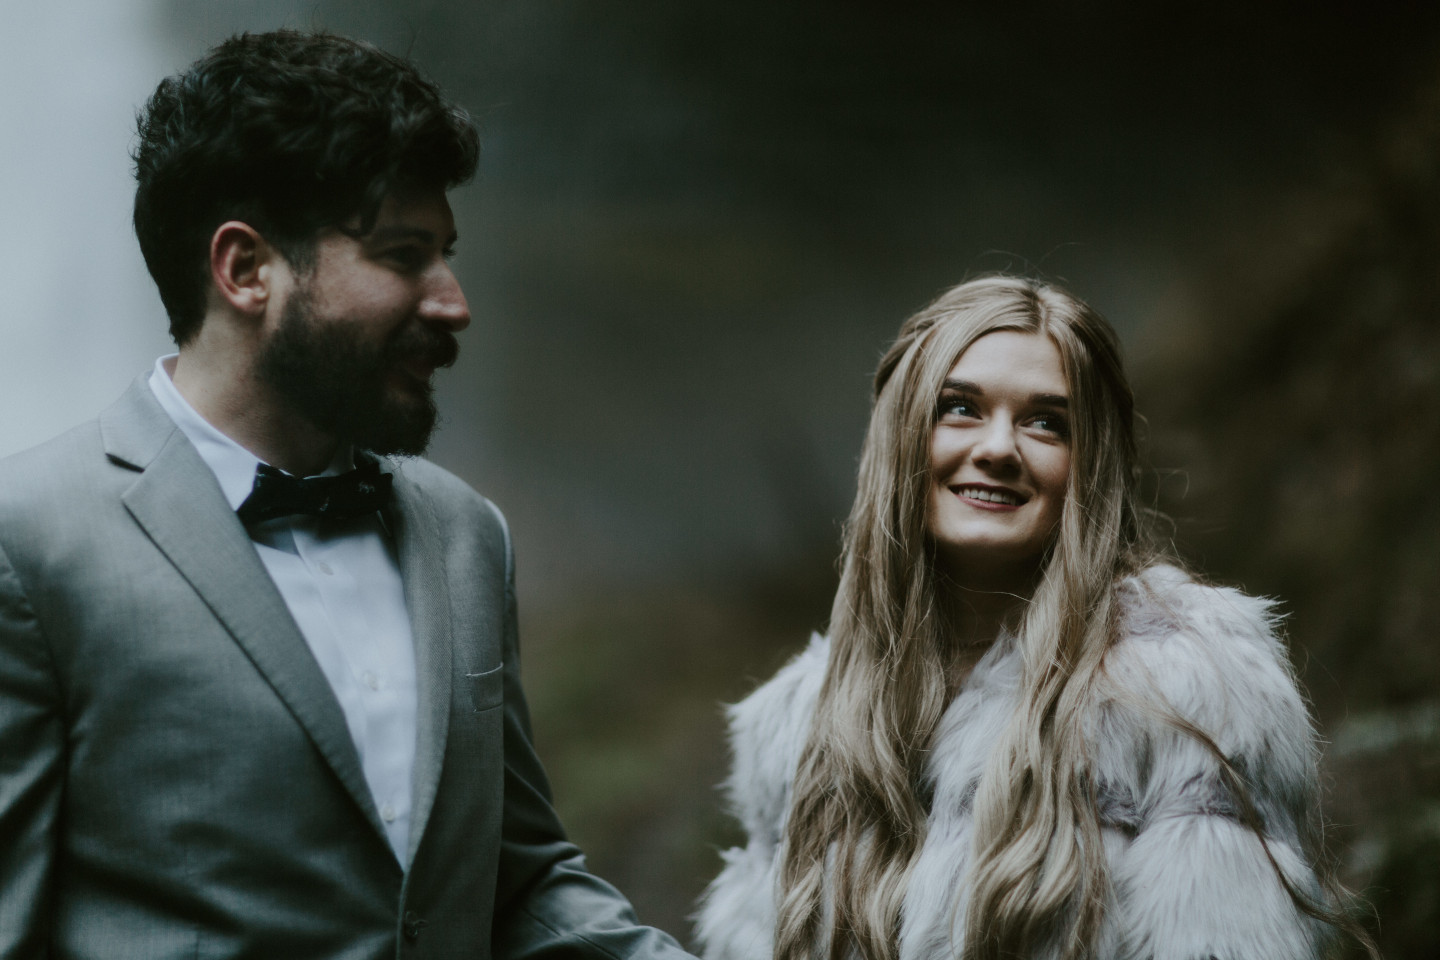 Boris and Tyanna at their elopement ceremony. Adventure elopement in the Columbia River Gorge by Sienna Plus Josh.